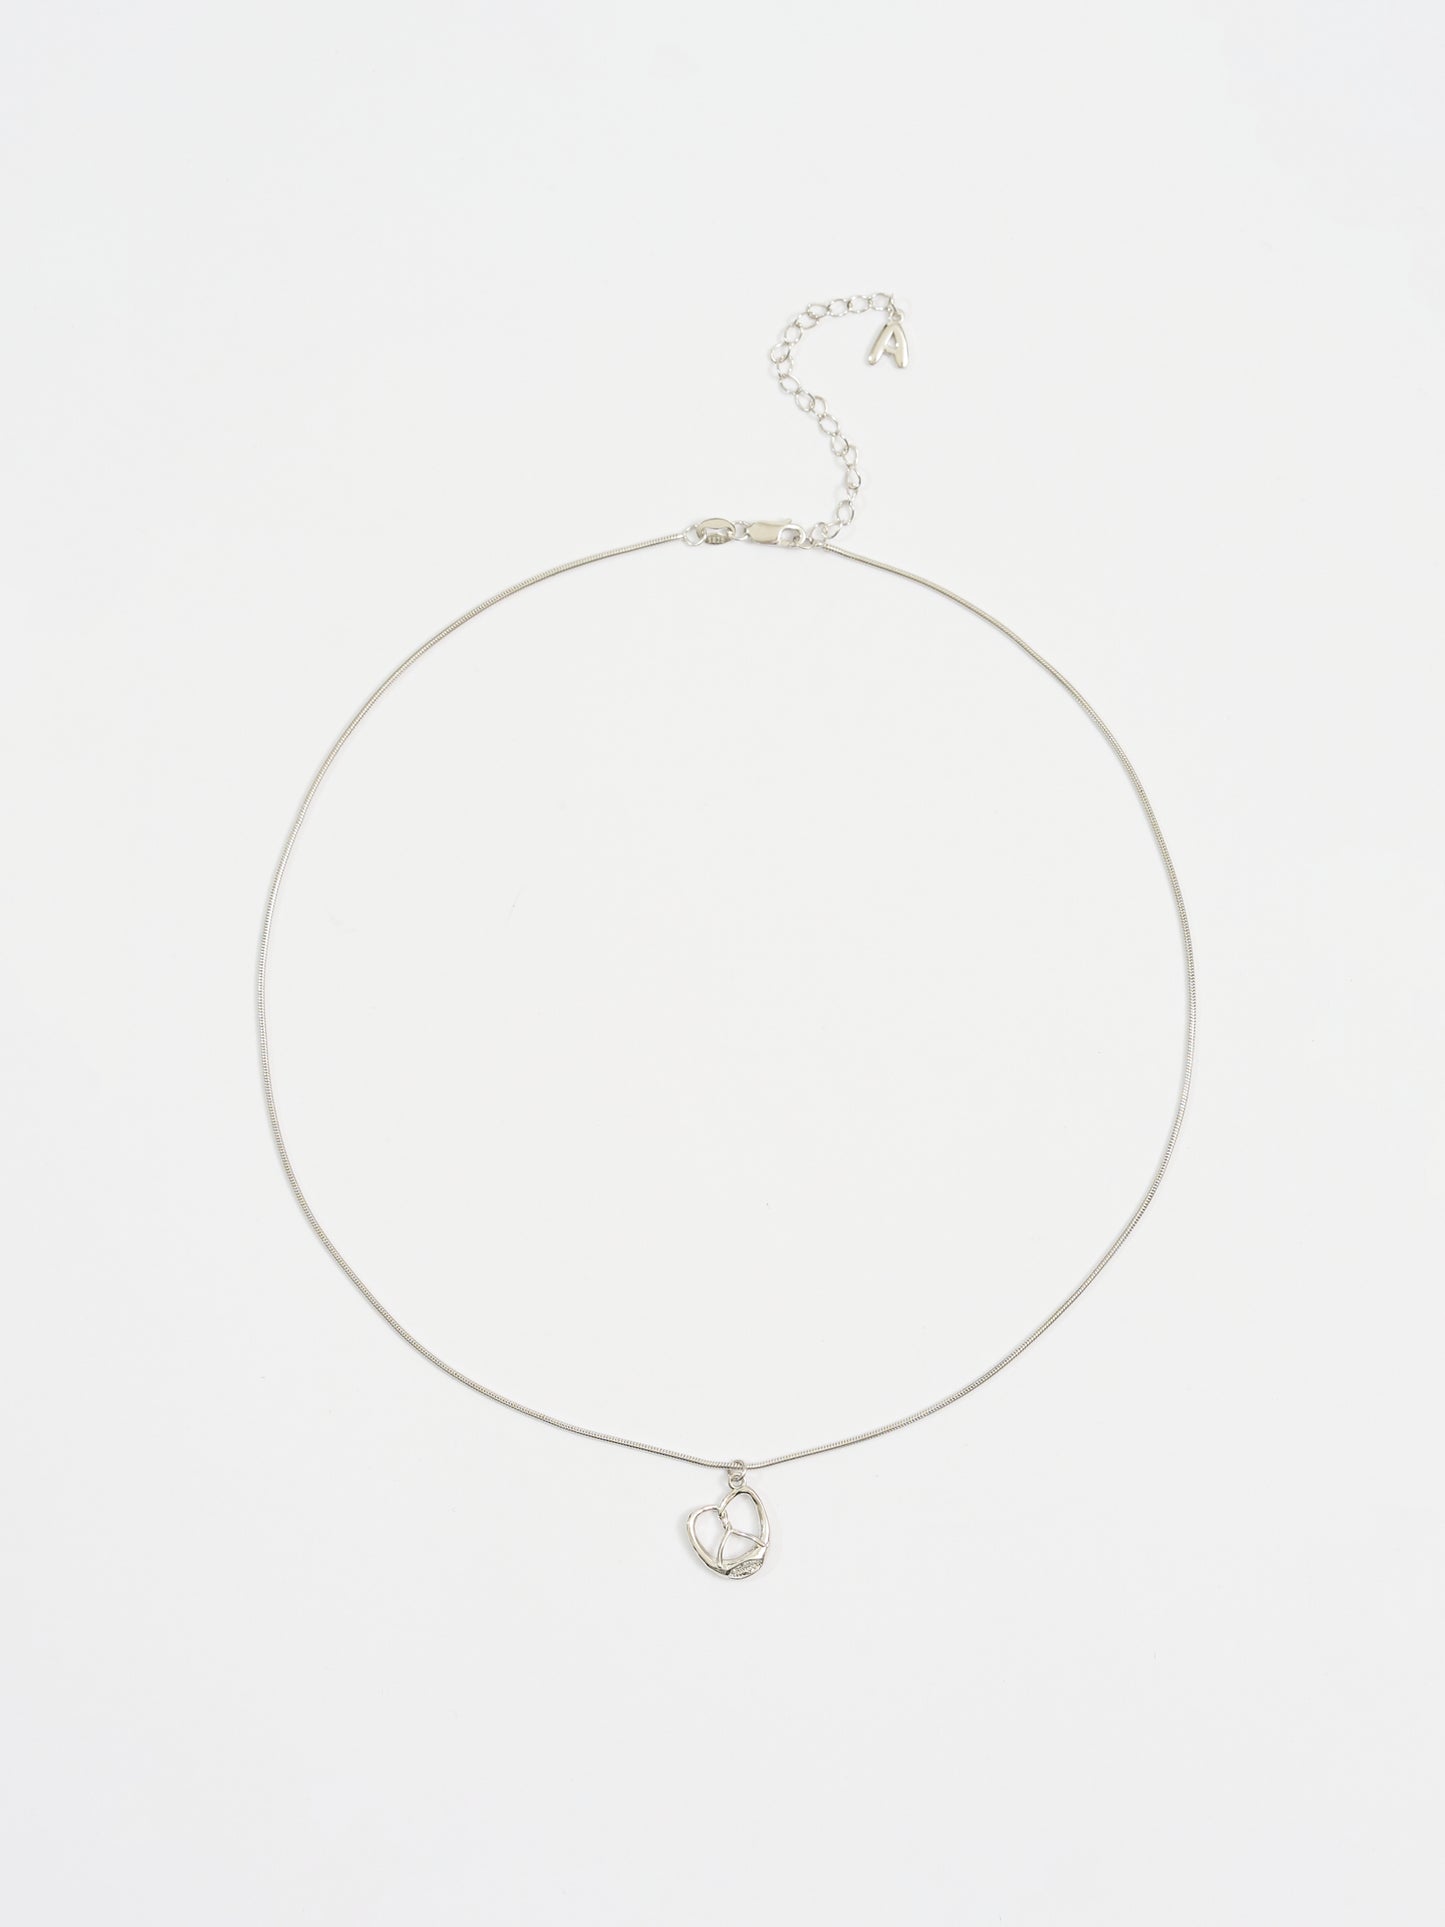 Bakery Collection - Sterling Silver Pretzel Charm Statement Necklace